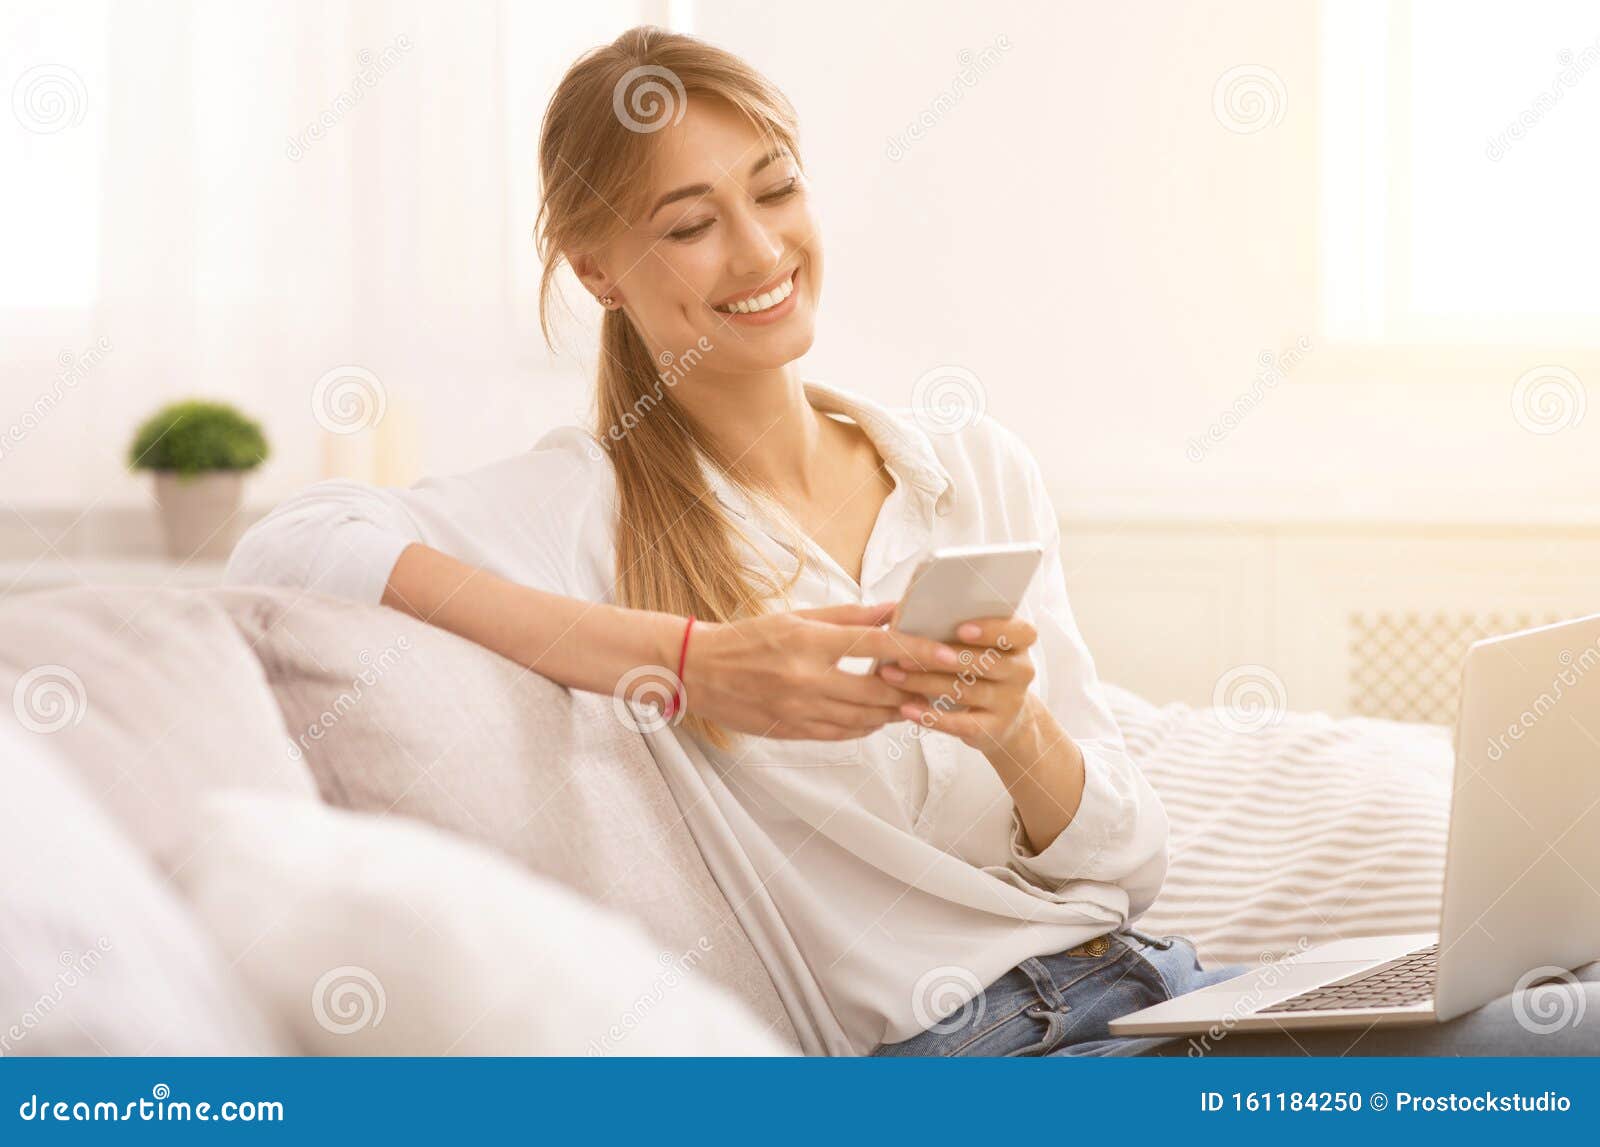 Relaxed Woman Using Smartphone Sitting with Laptop on Couch Indoor ...